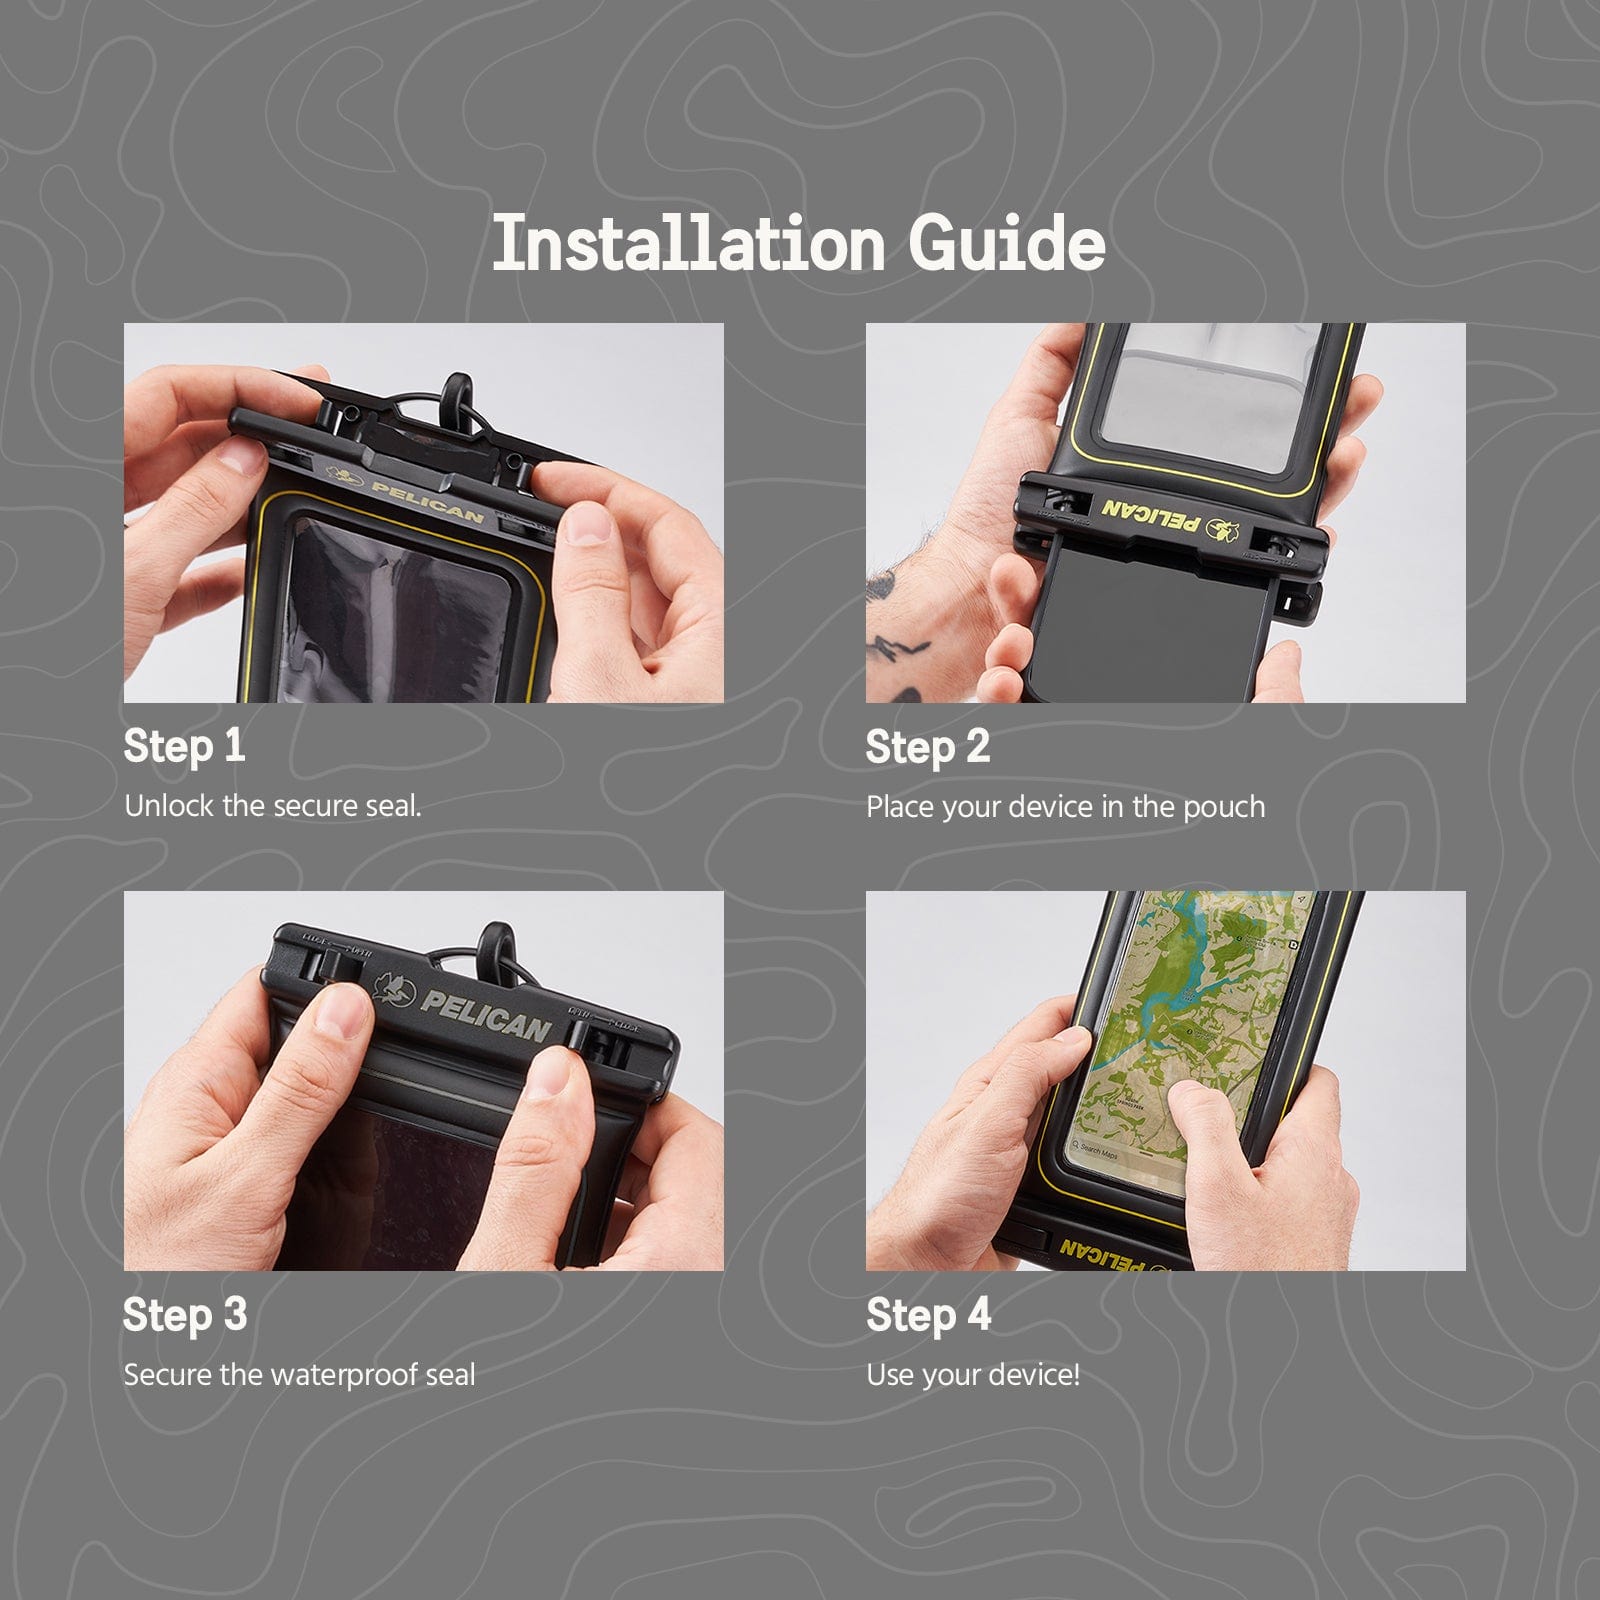 Installation Guide. Step 1. Unlock the secure seal. Step 2. Place your device in the pouch. Step 3 Secure the waterproof seal. Step 4 Use your device!